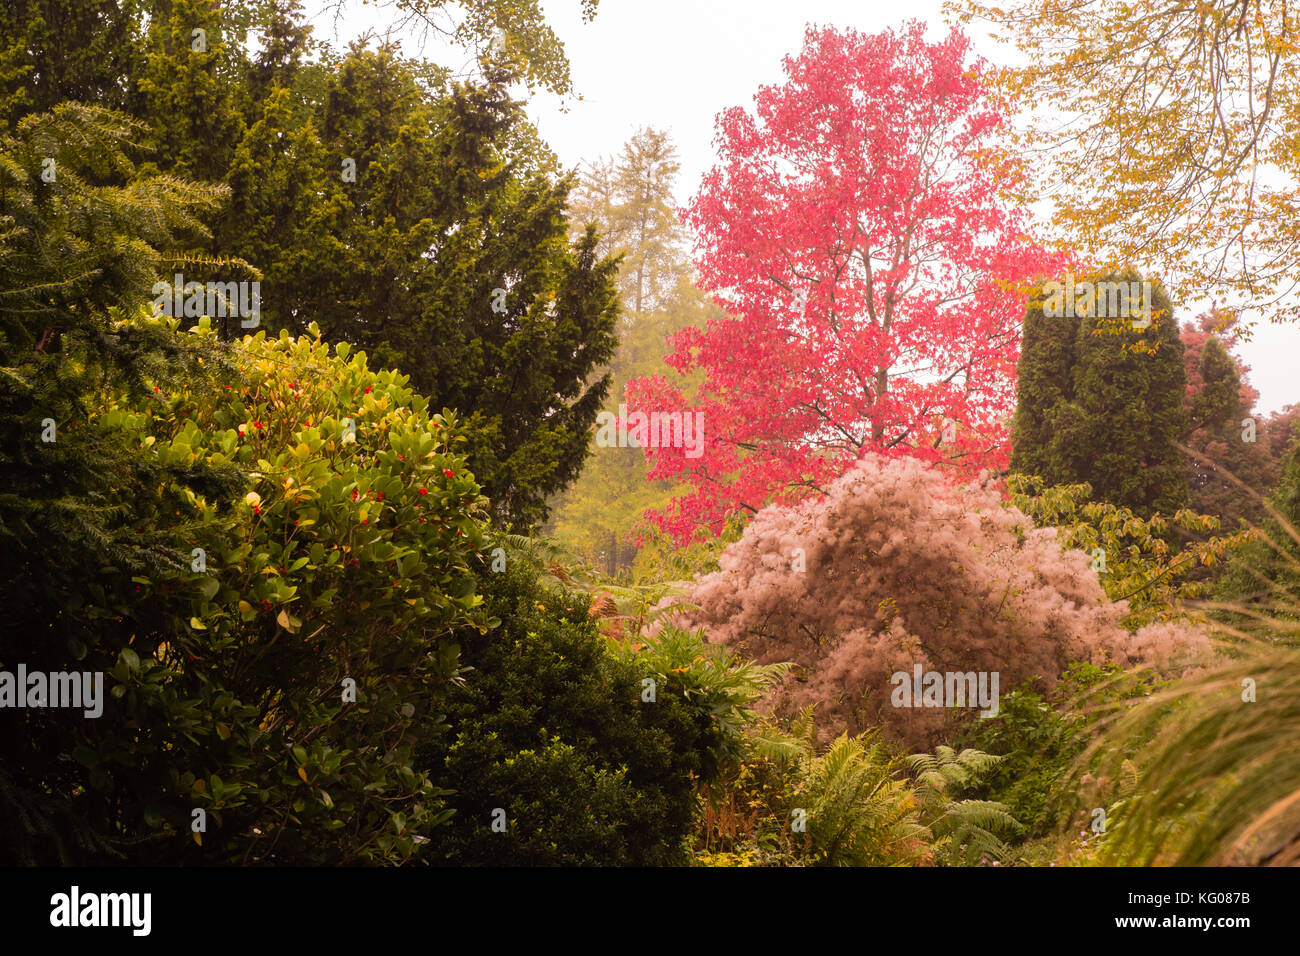 Autumn colours in Bath Botanic Gardens. Trees and bushes showing autumnal reds, yellows and greens as October advances in England Stock Photo